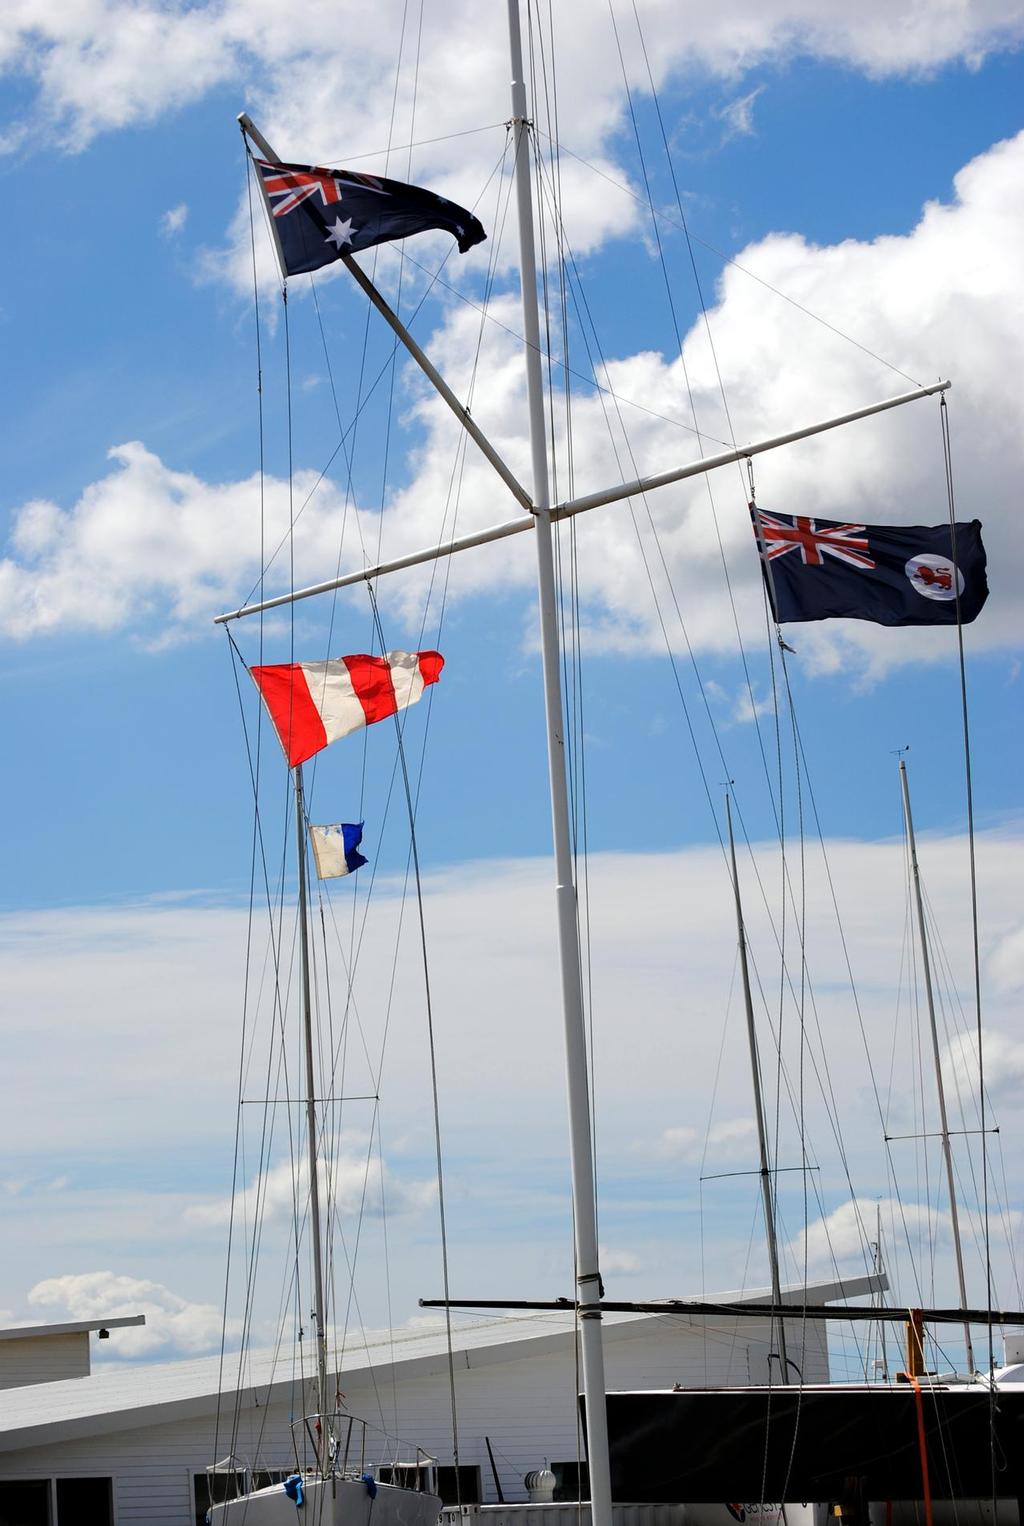 &rsquo;AP&rsquo; pennant over code flag &rsquo;A`` at the Royal Yacht Club of Tasmania indicating that today&rsquo;s racing has been postponed to another day. photo copyright Peter Campbell taken at  and featuring the  class